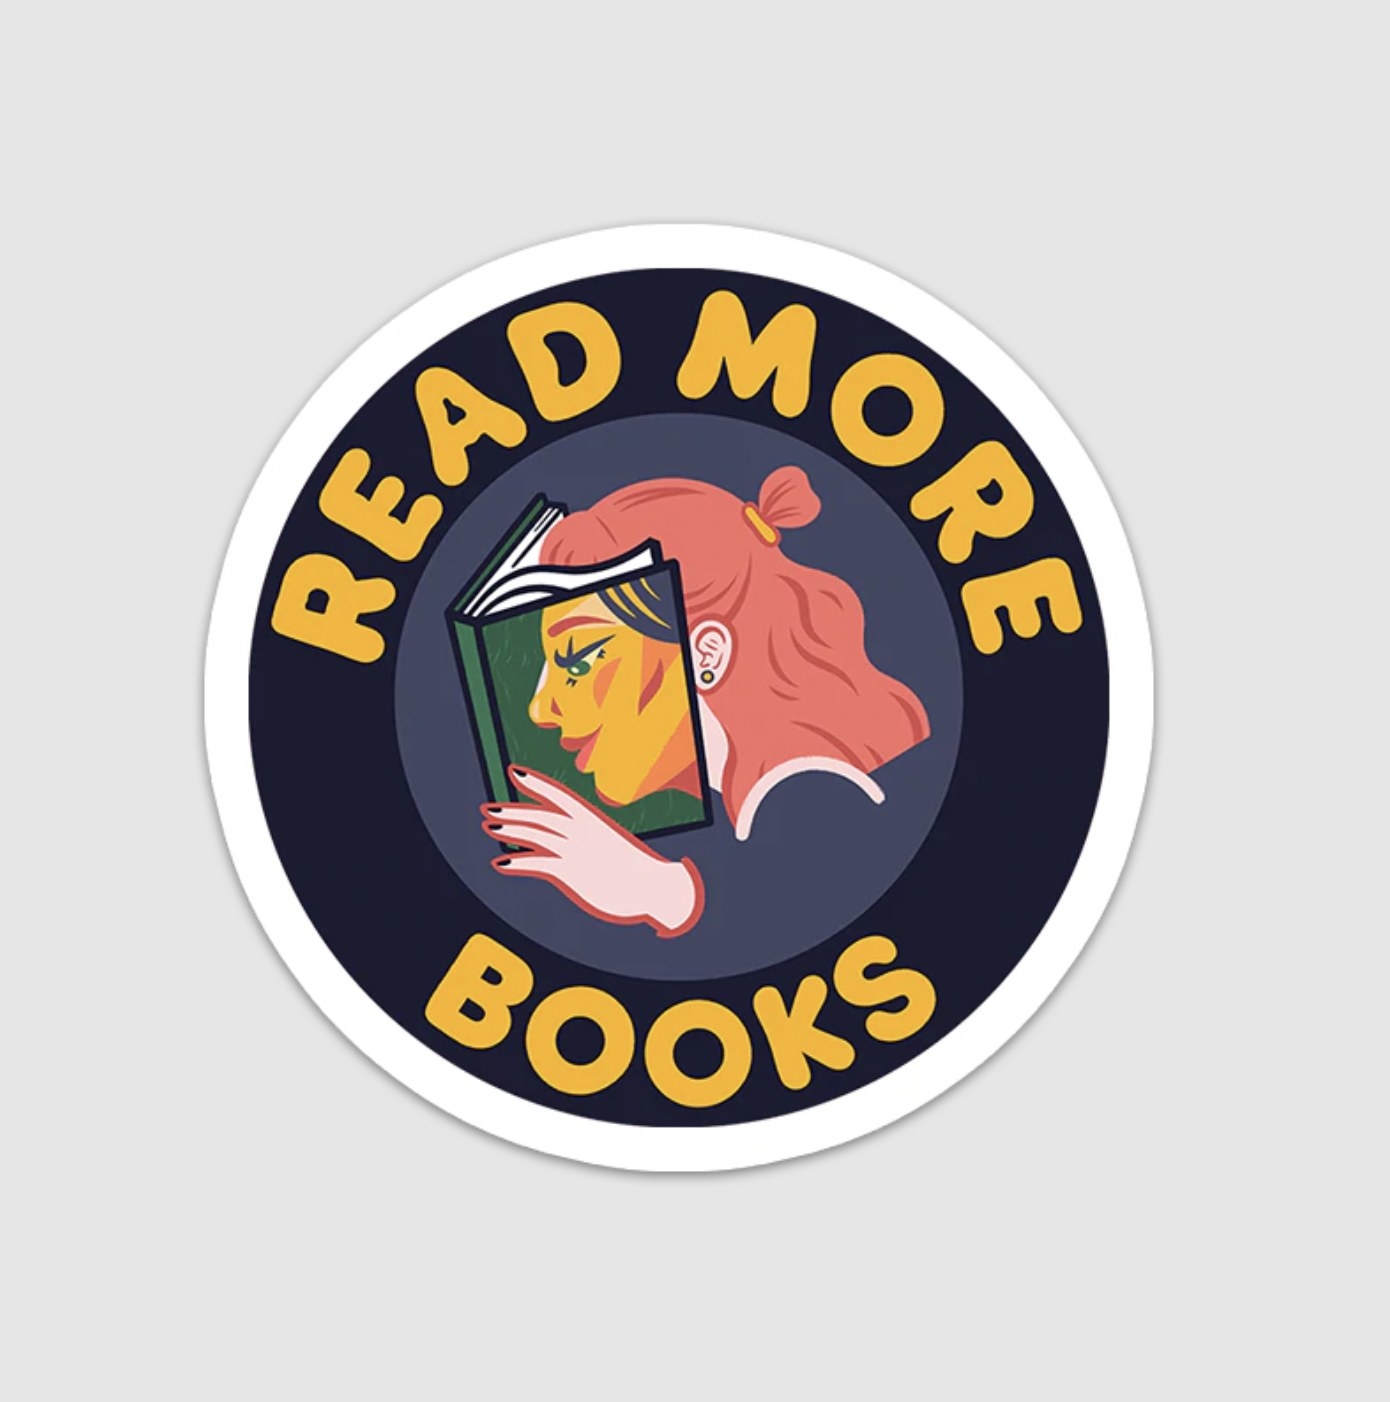 the circular sticker showing person with shoulder length hair and head buried into book with text &quot;read more books&quot; radiating out from center design